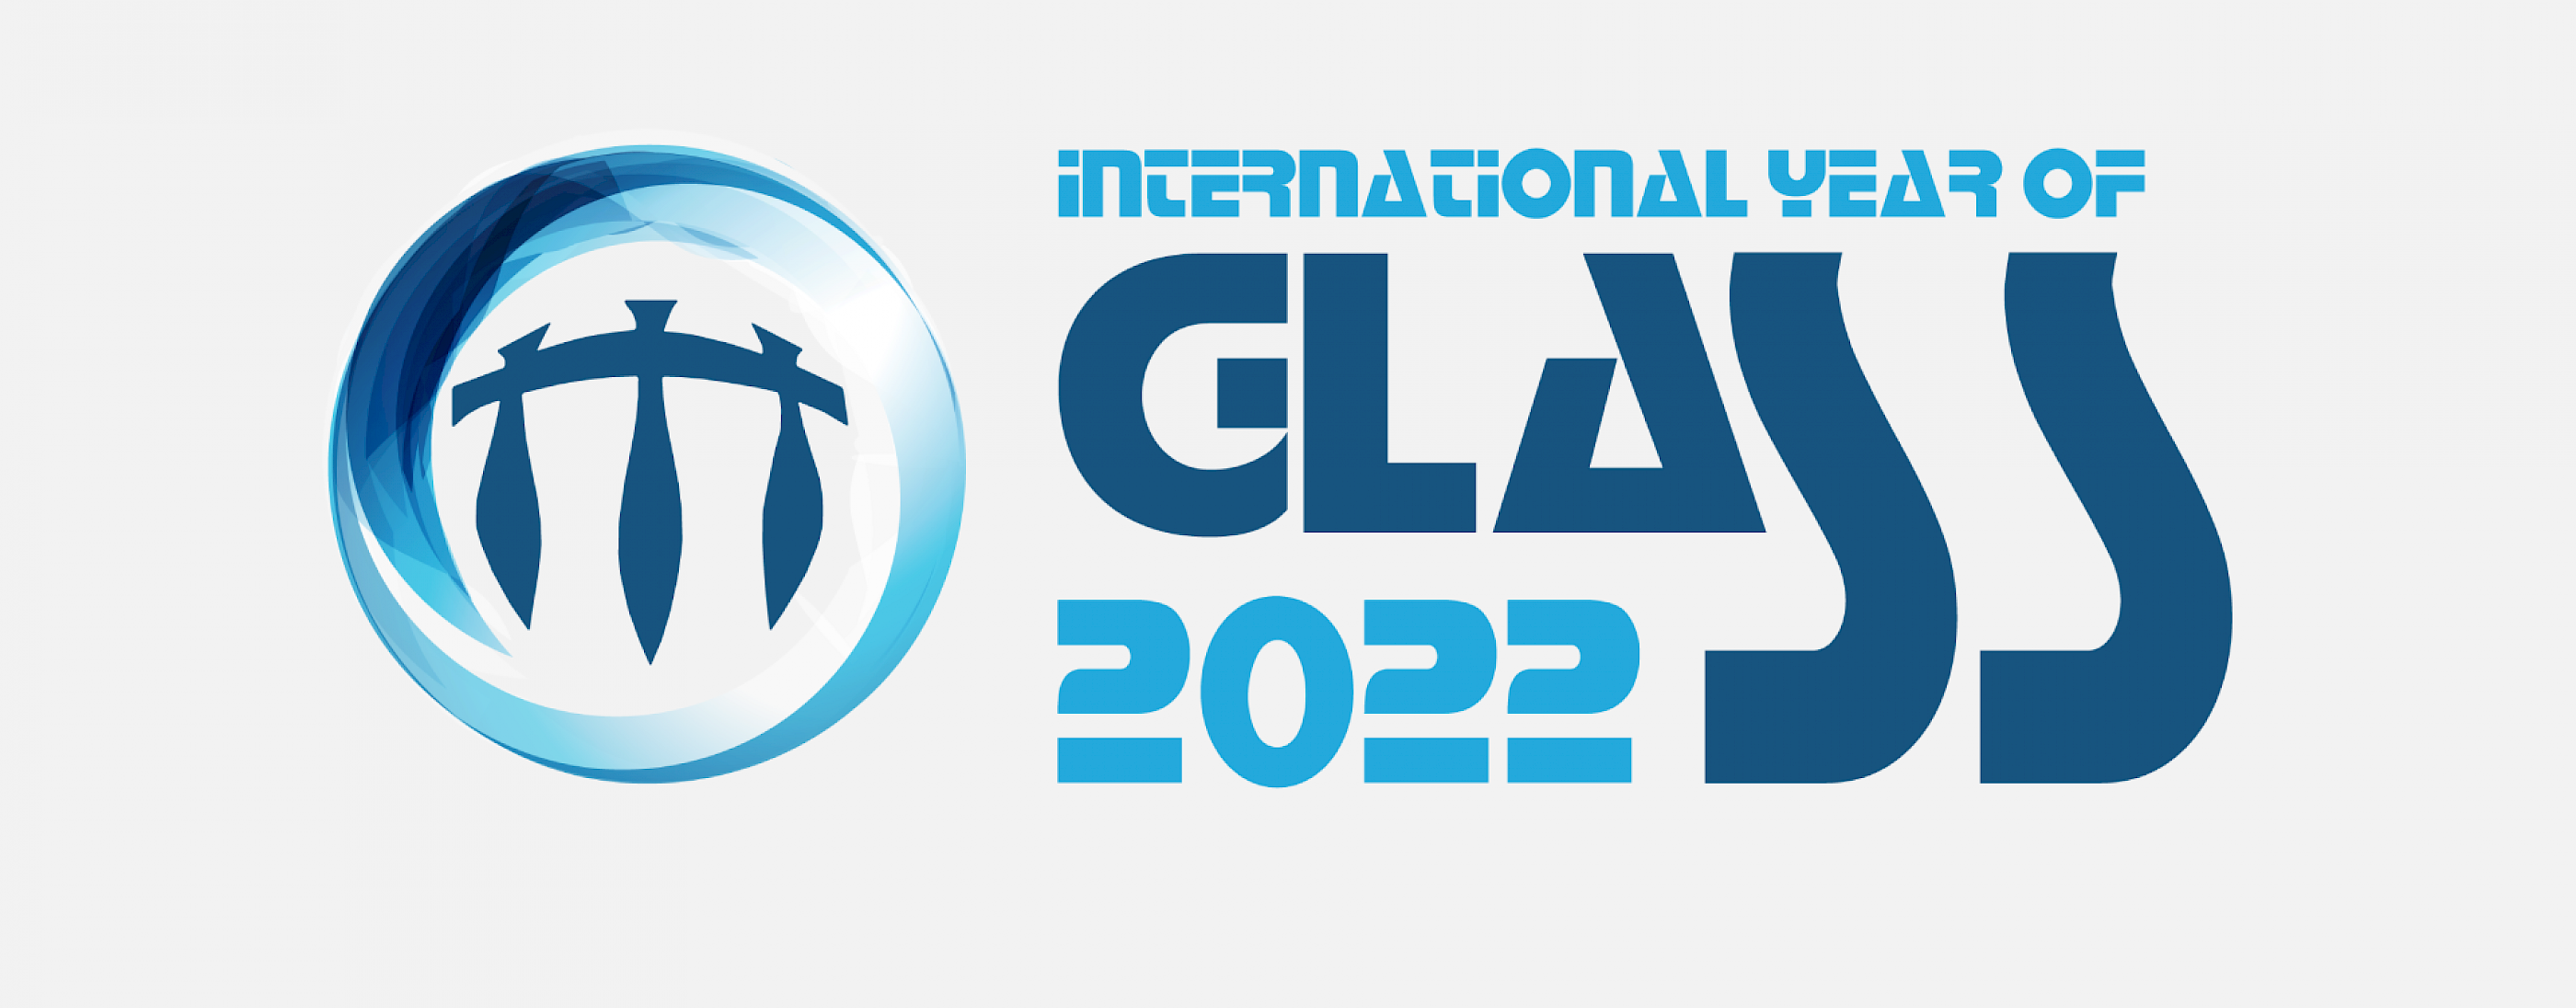 Glass Technology Services celebrates the start of the International Year of Glass 2022